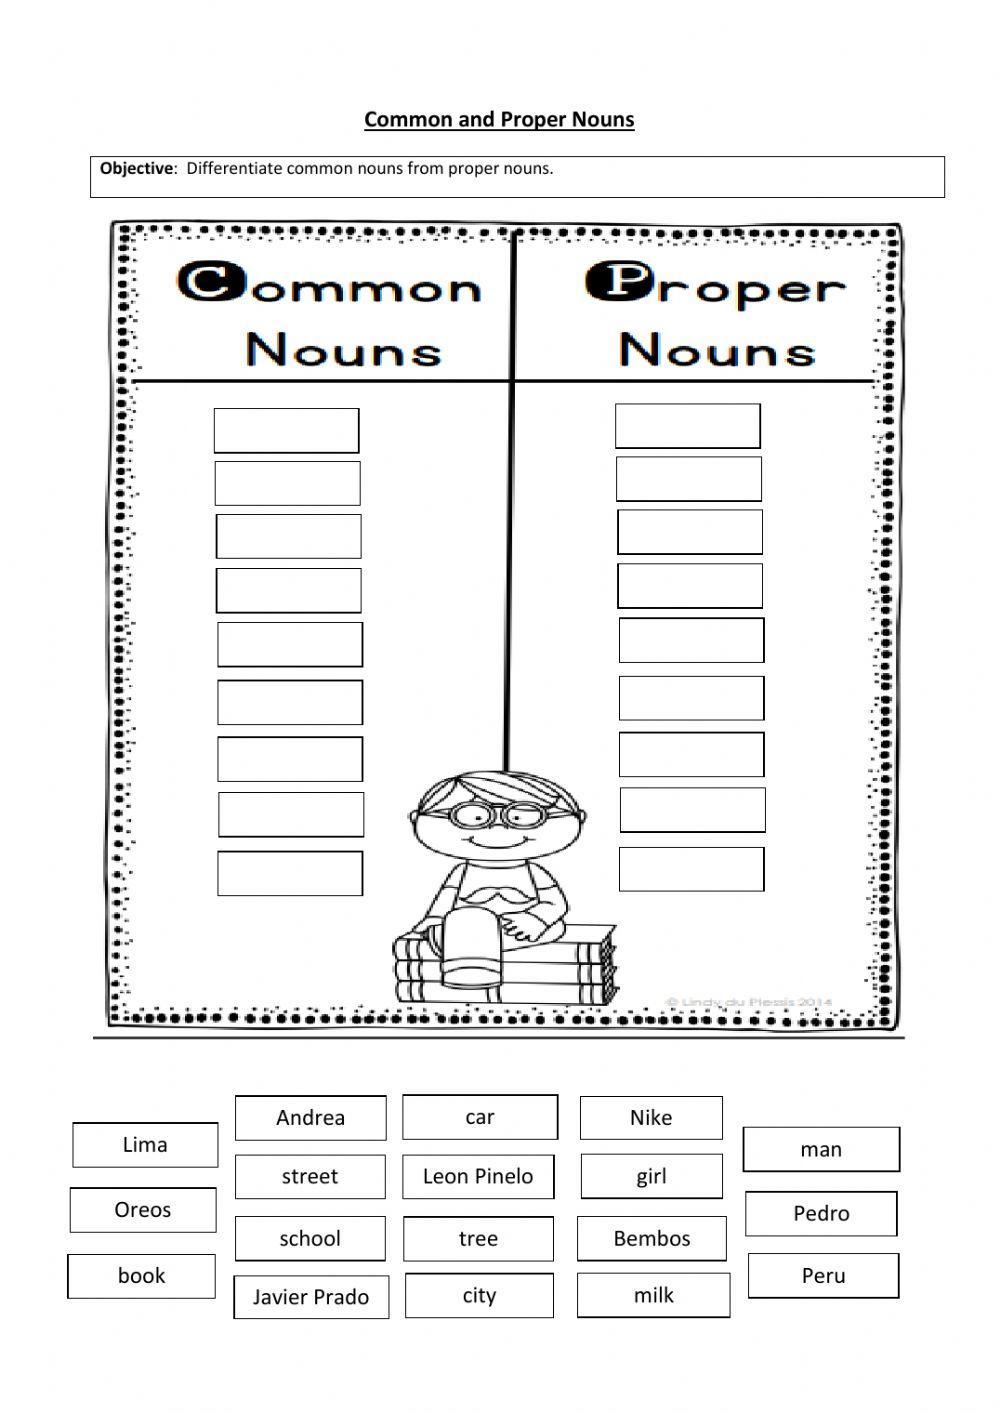 Common and proper nouns sorting